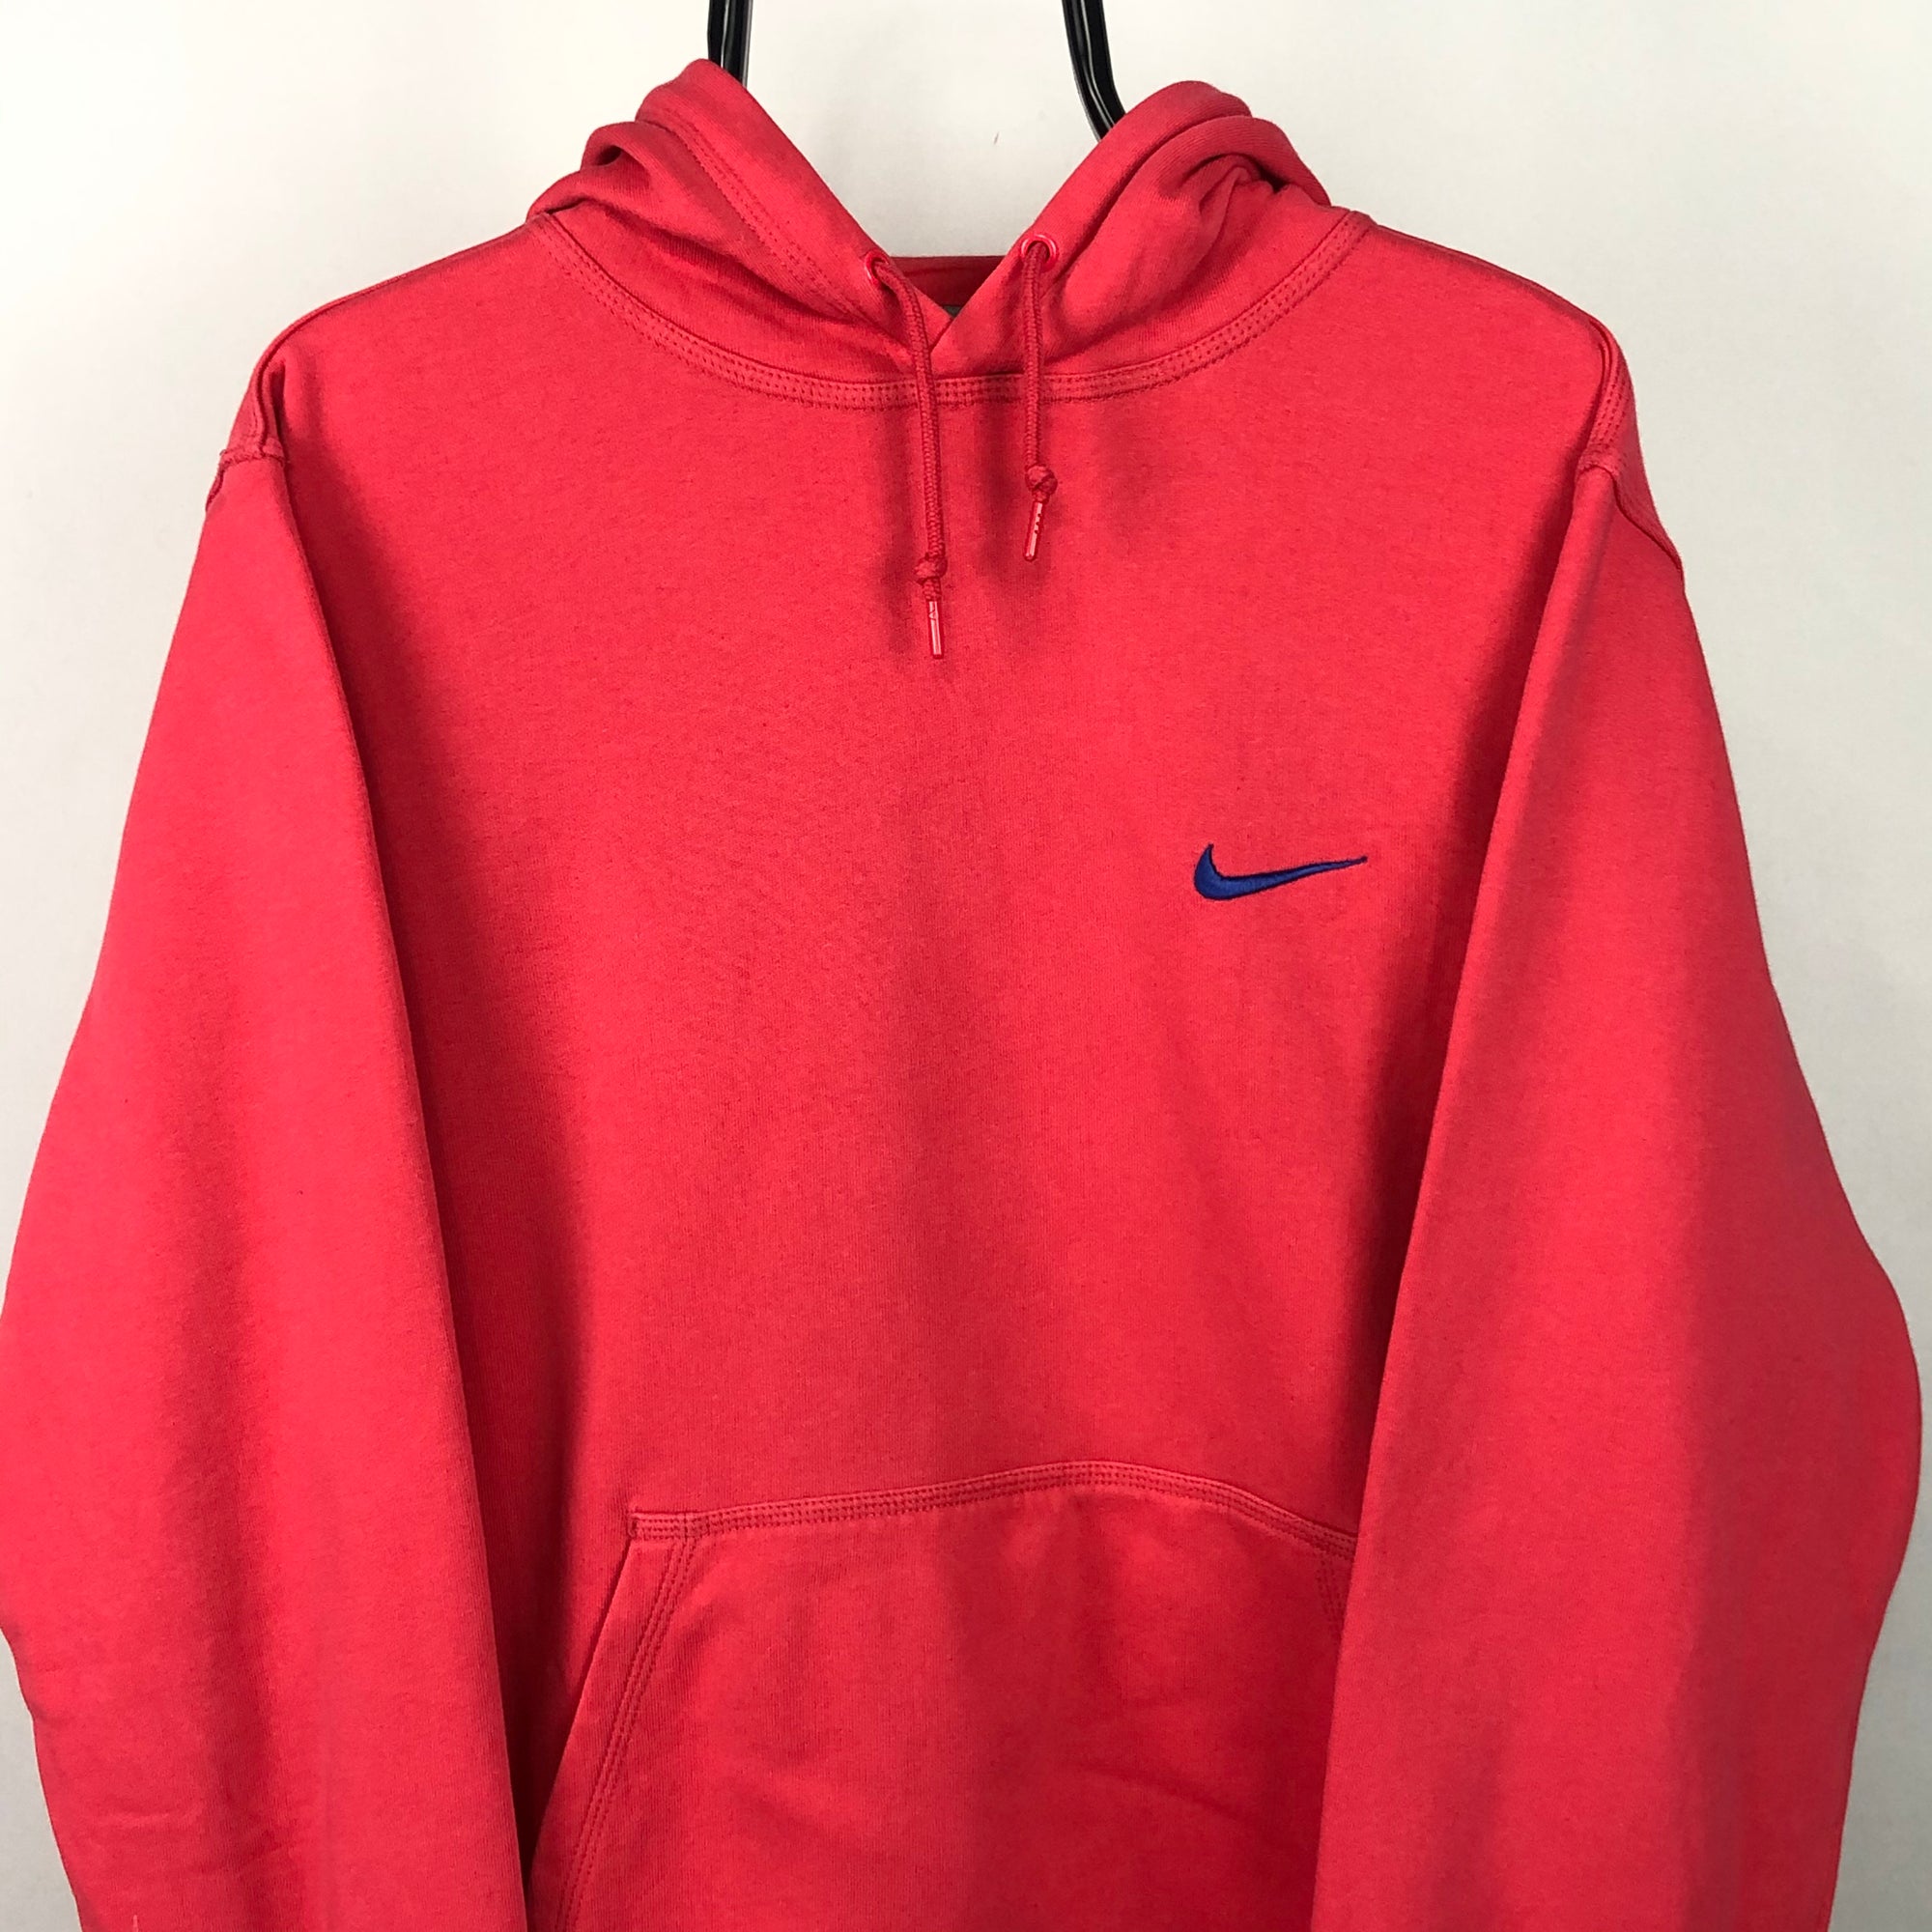 Nike Embroidered Small Swoosh Hoodie in Pink/Blue - Men's Medium/Women's Large